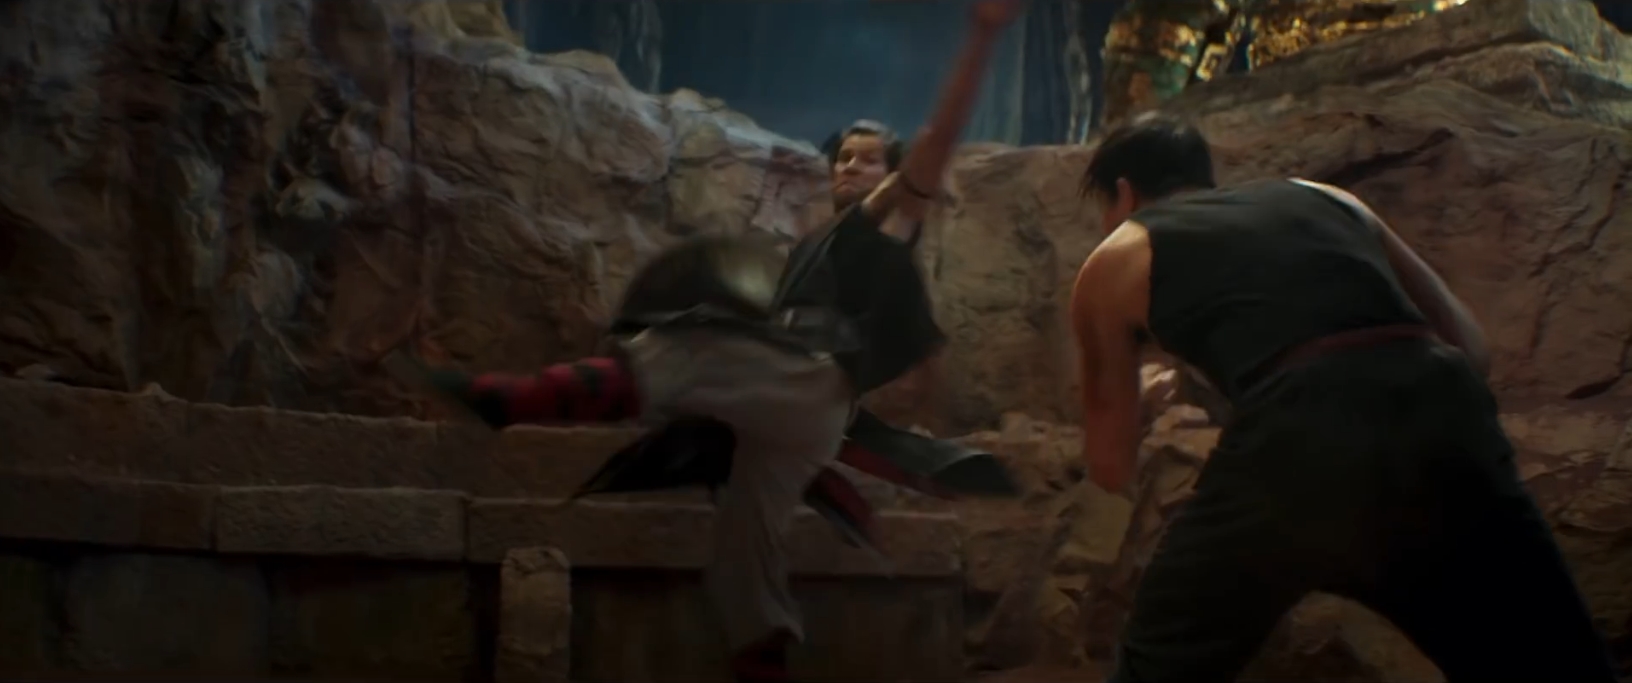 Mortal Kombat trailer: 16 secrets and easters eggs that have been beaten